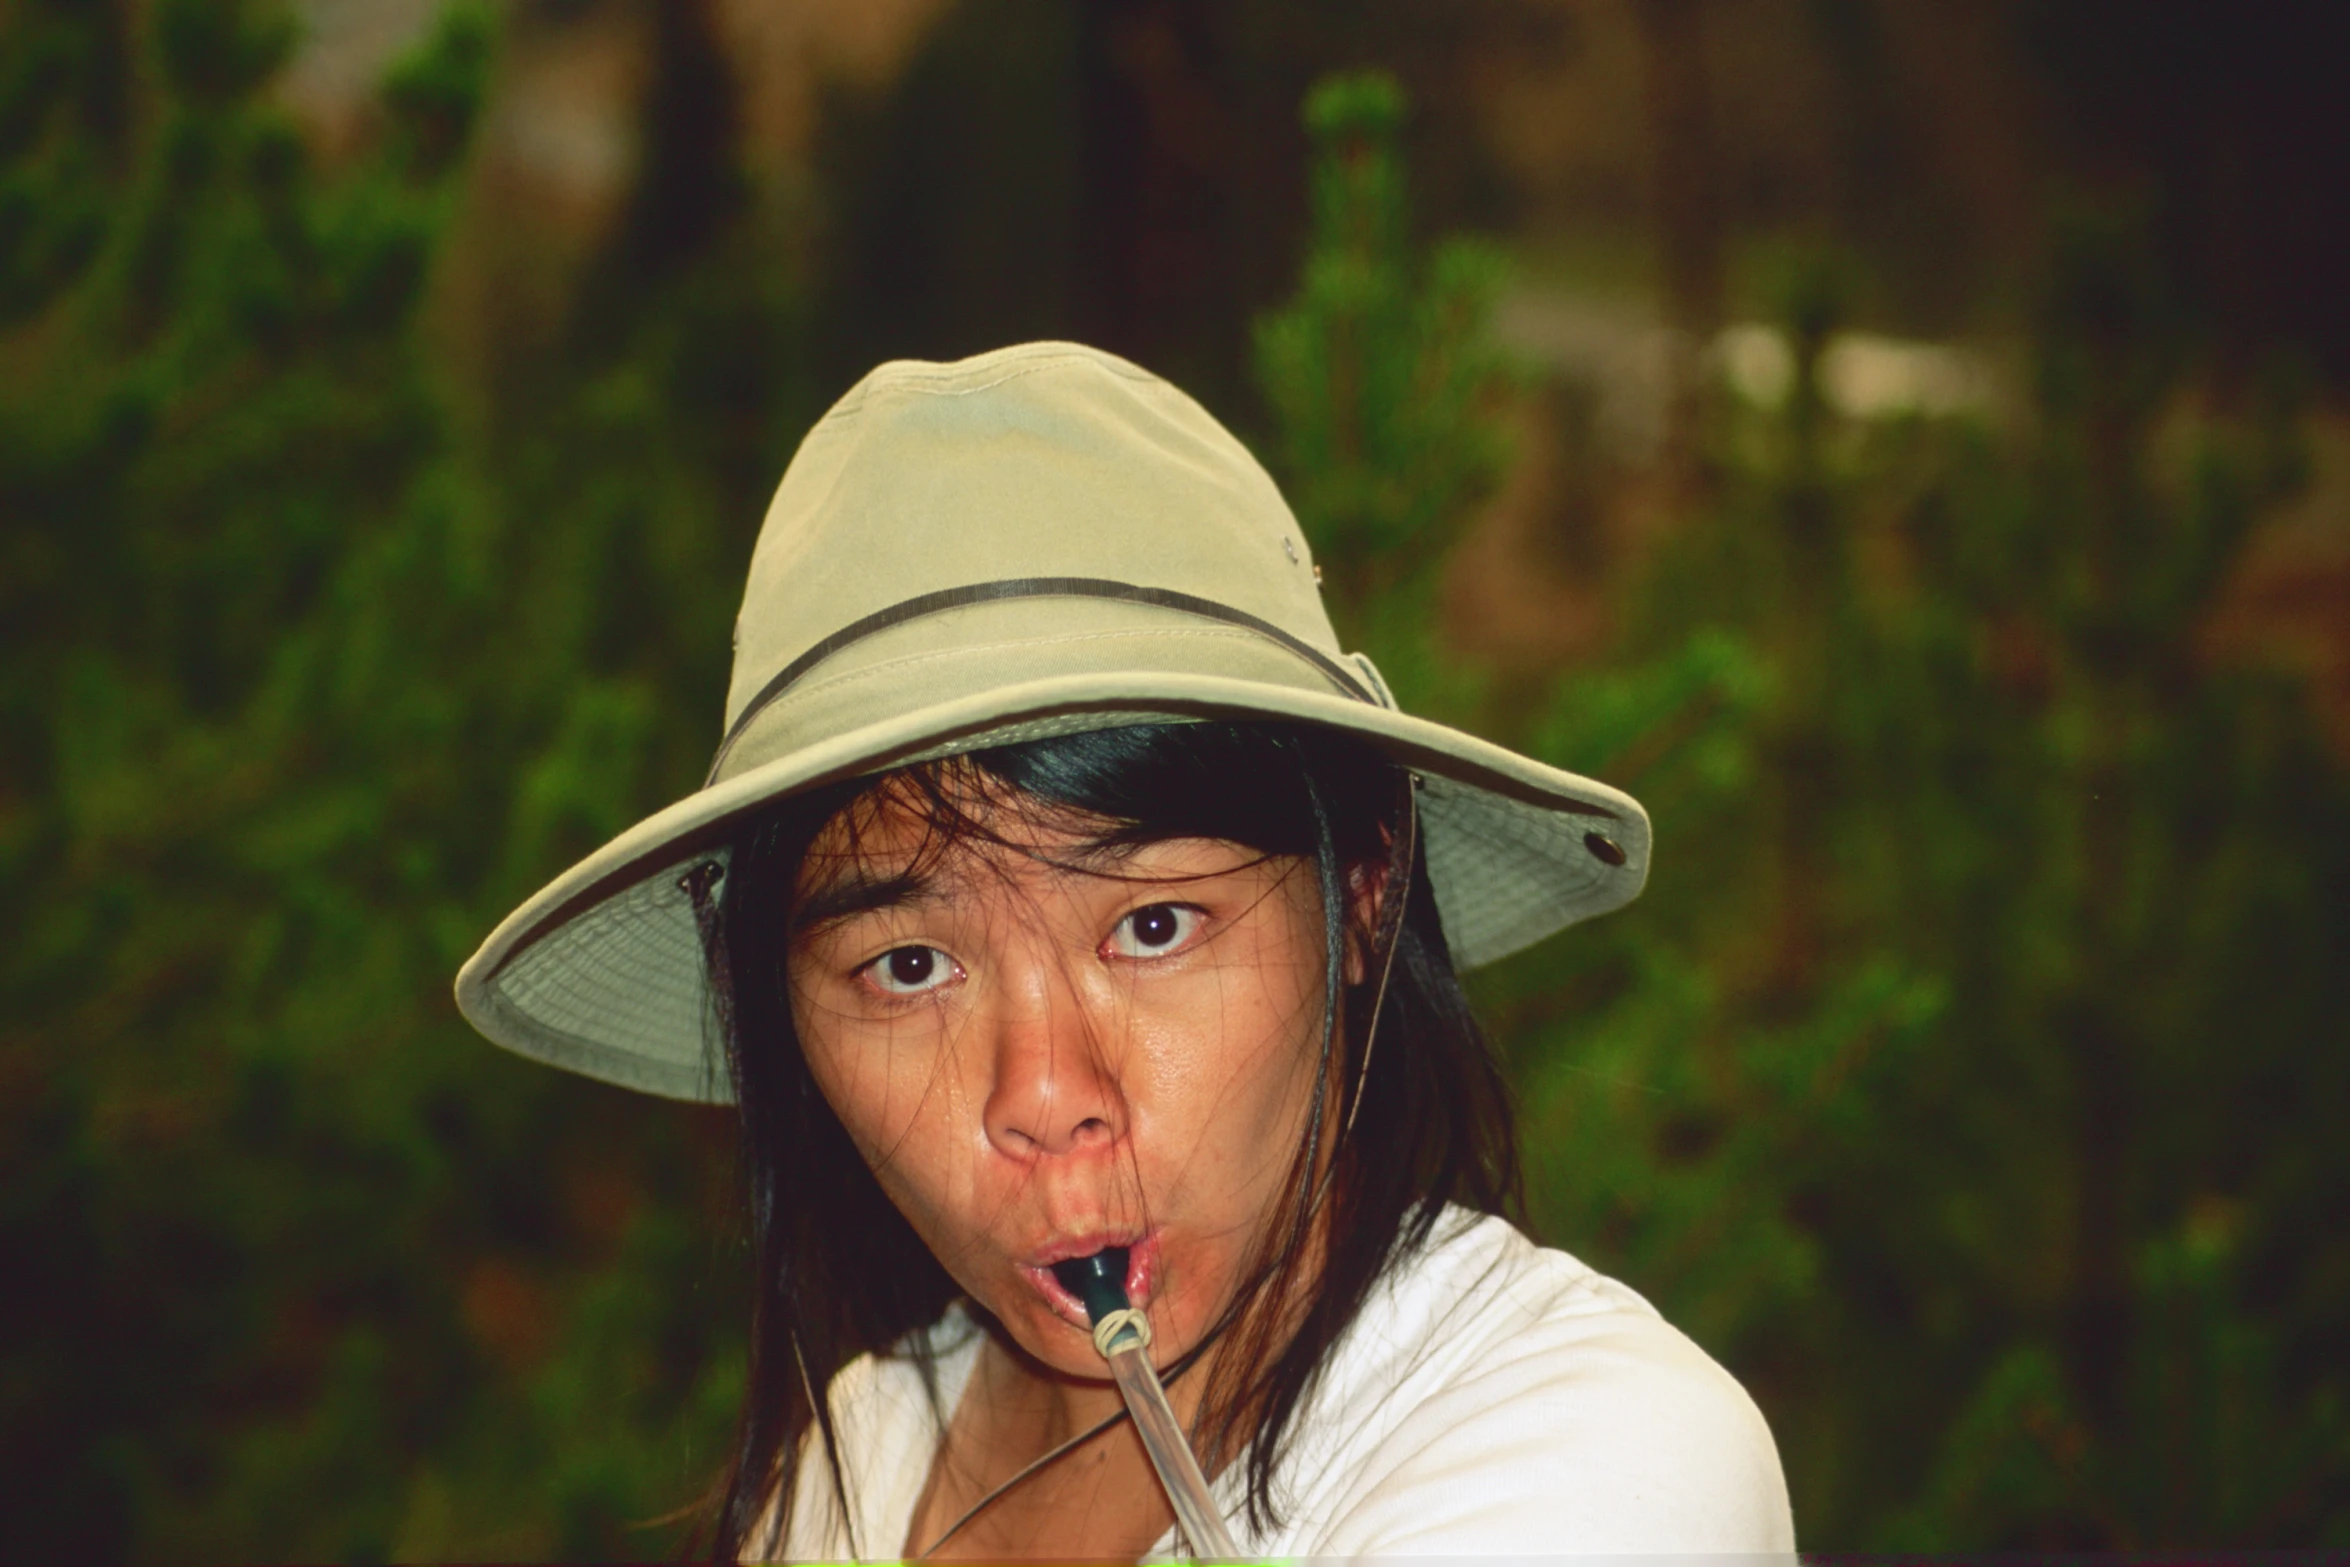 a woman sticking her tongue out with a green hat on